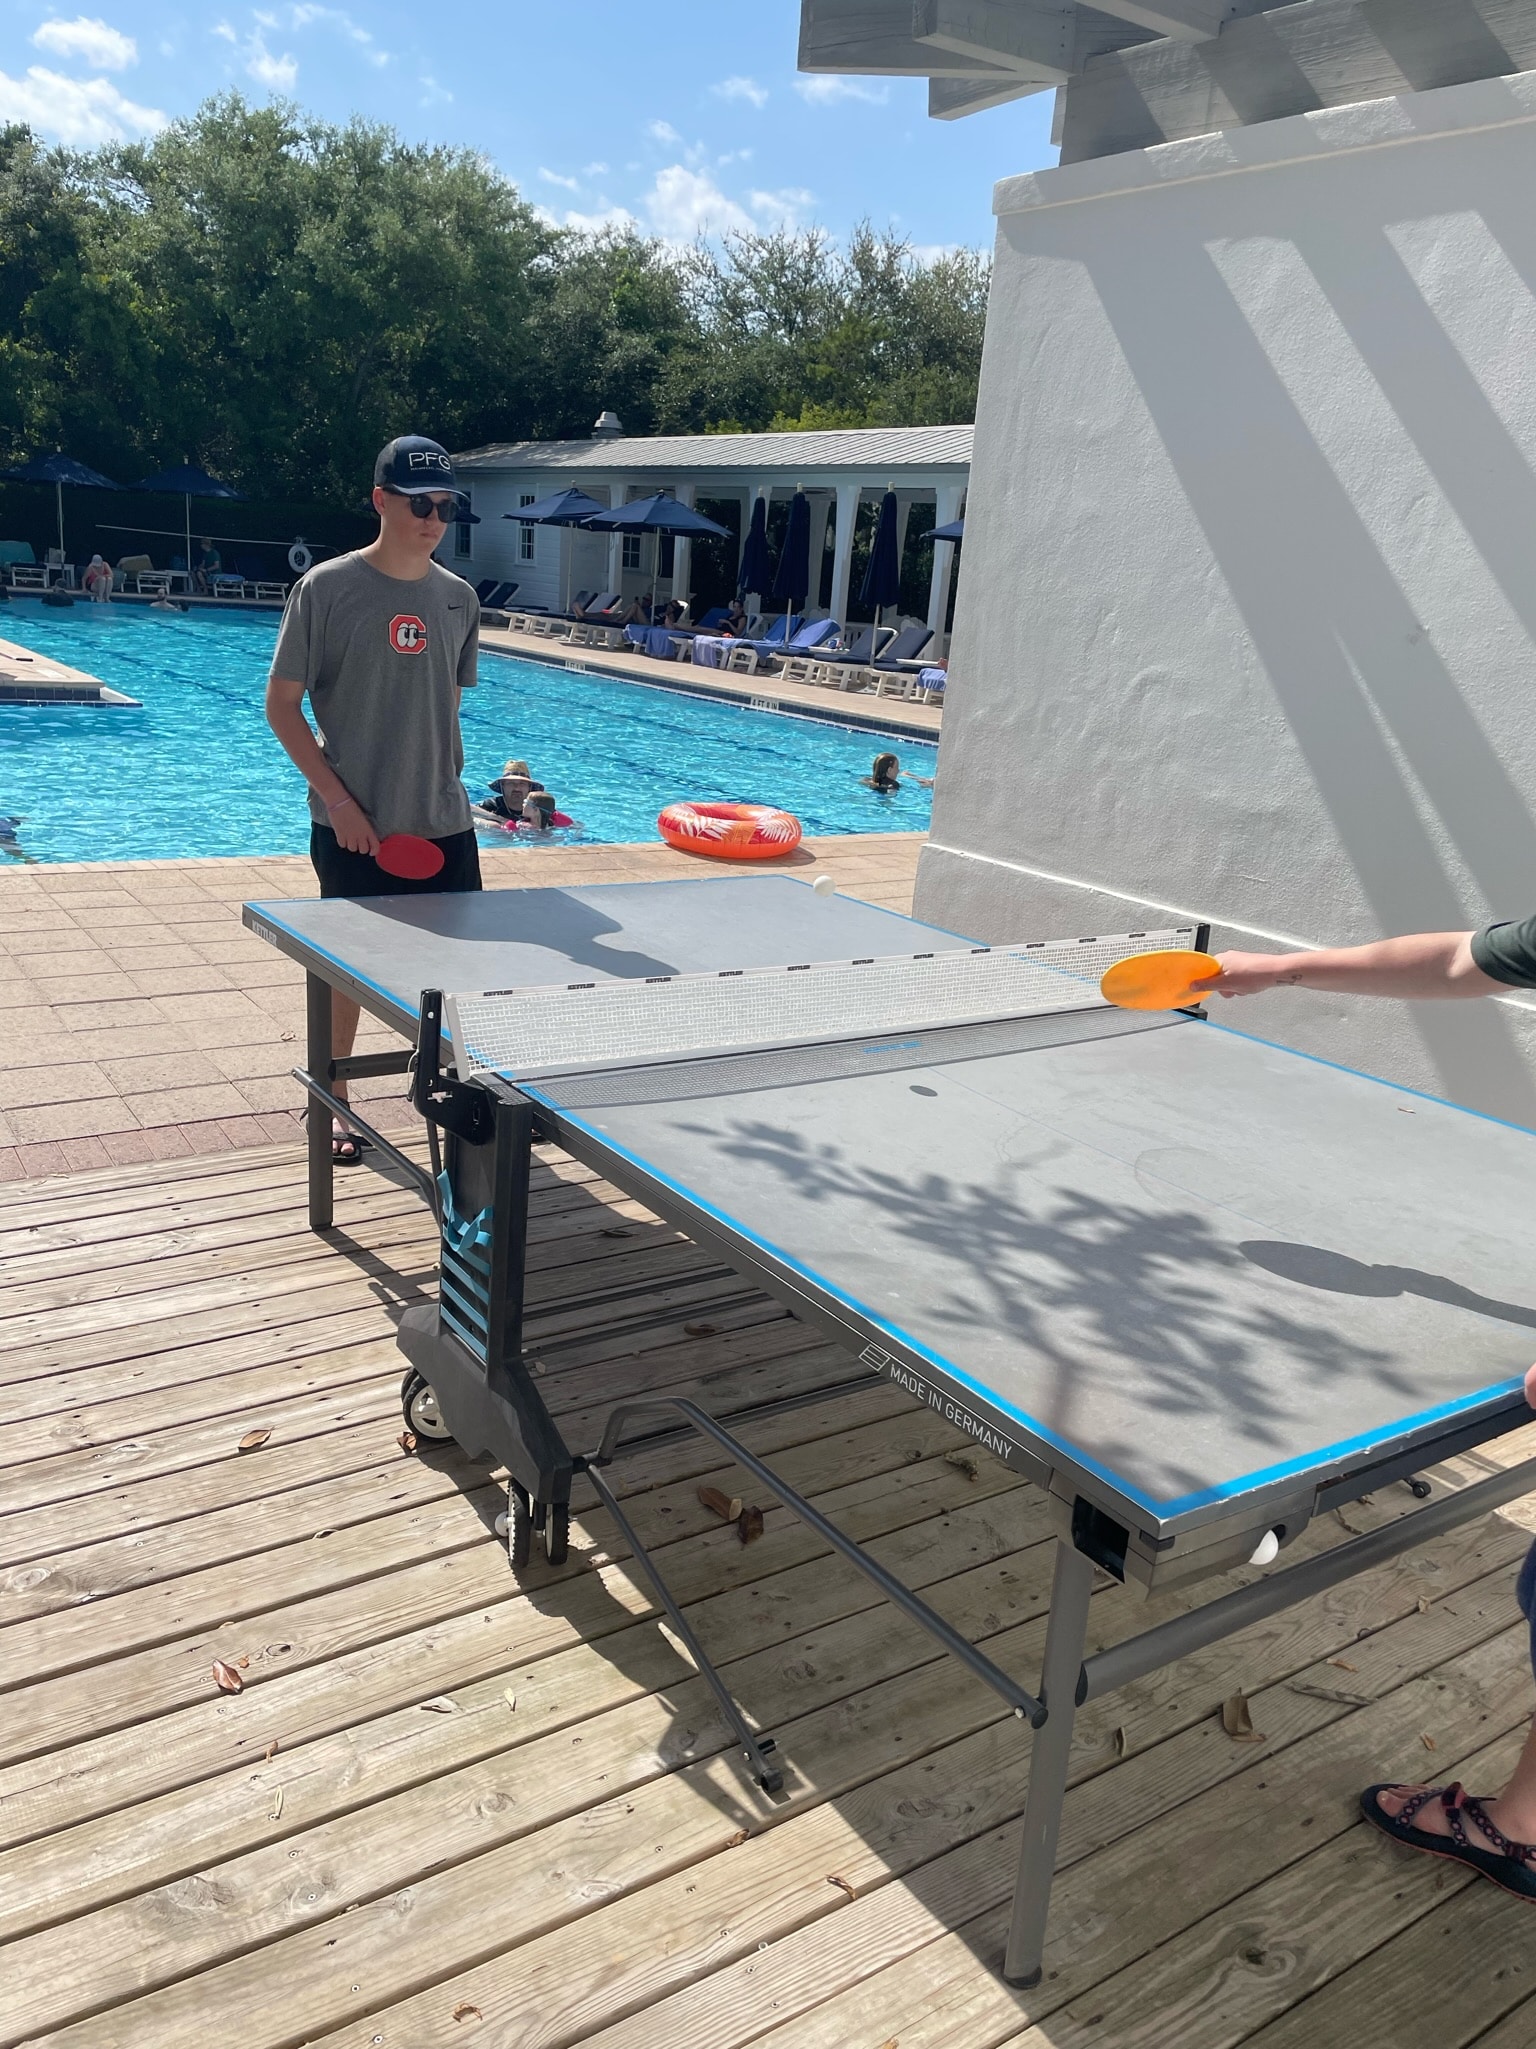 teenagers playing ping pong at the pool